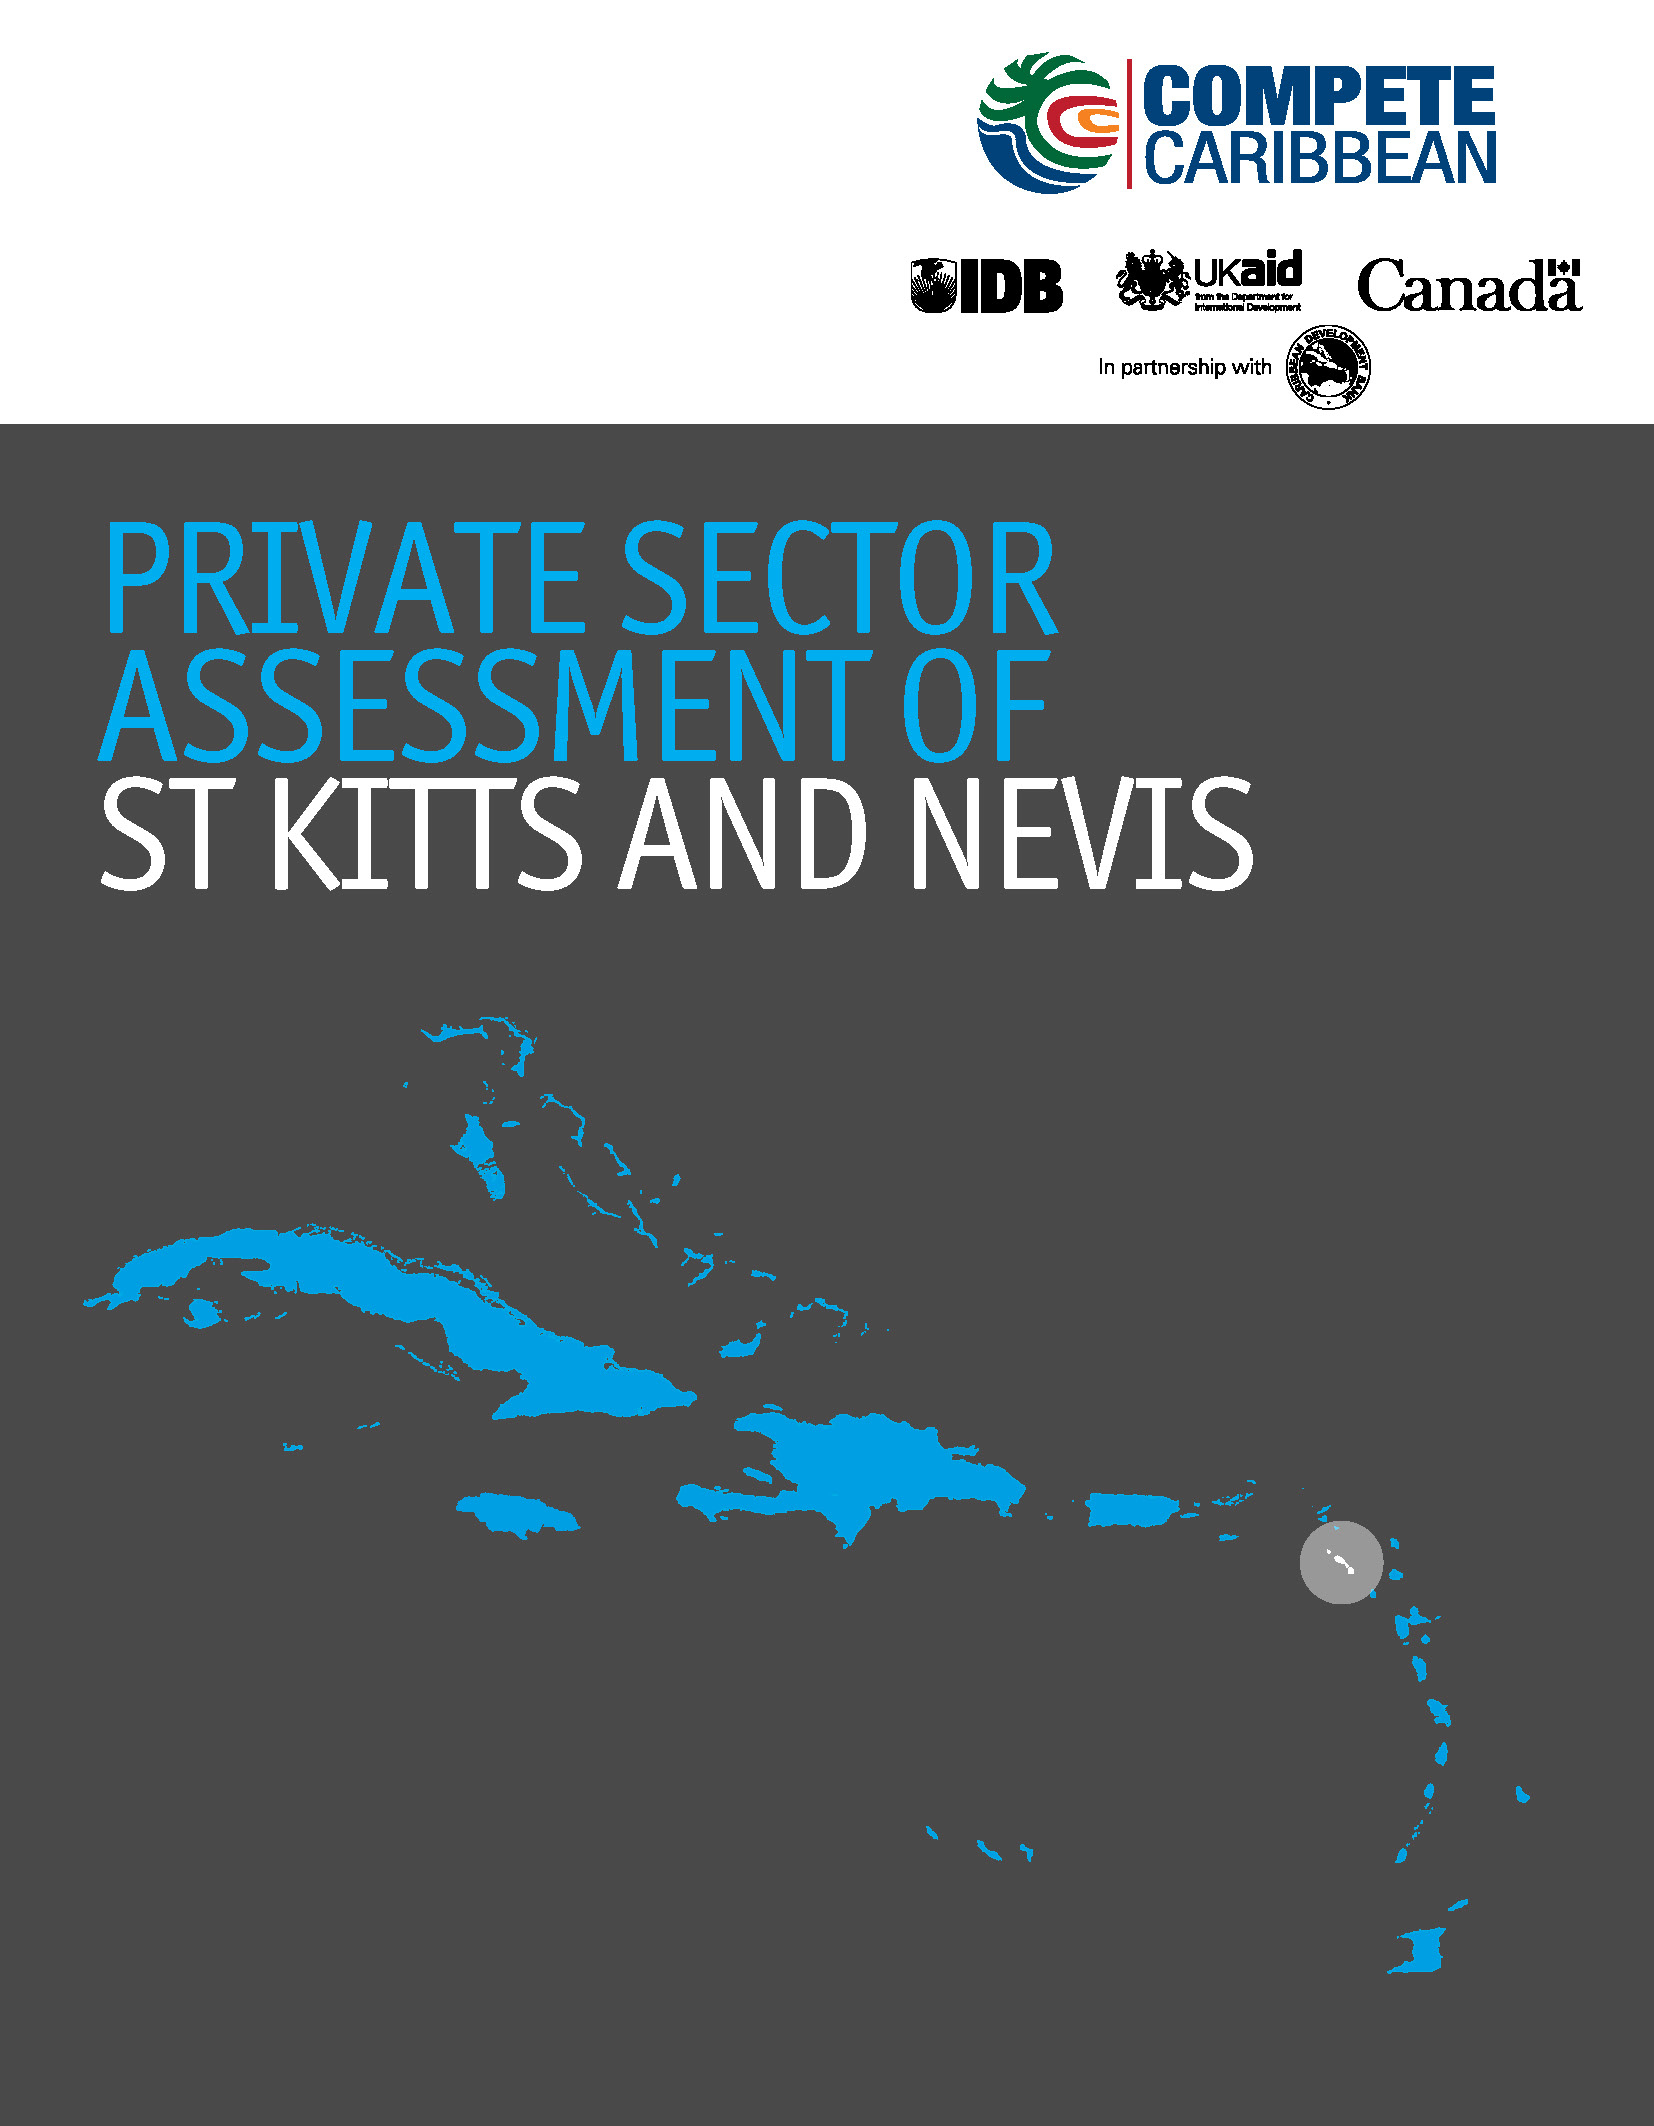 cover showing island chain with St. Kitts and Nevis highlighted